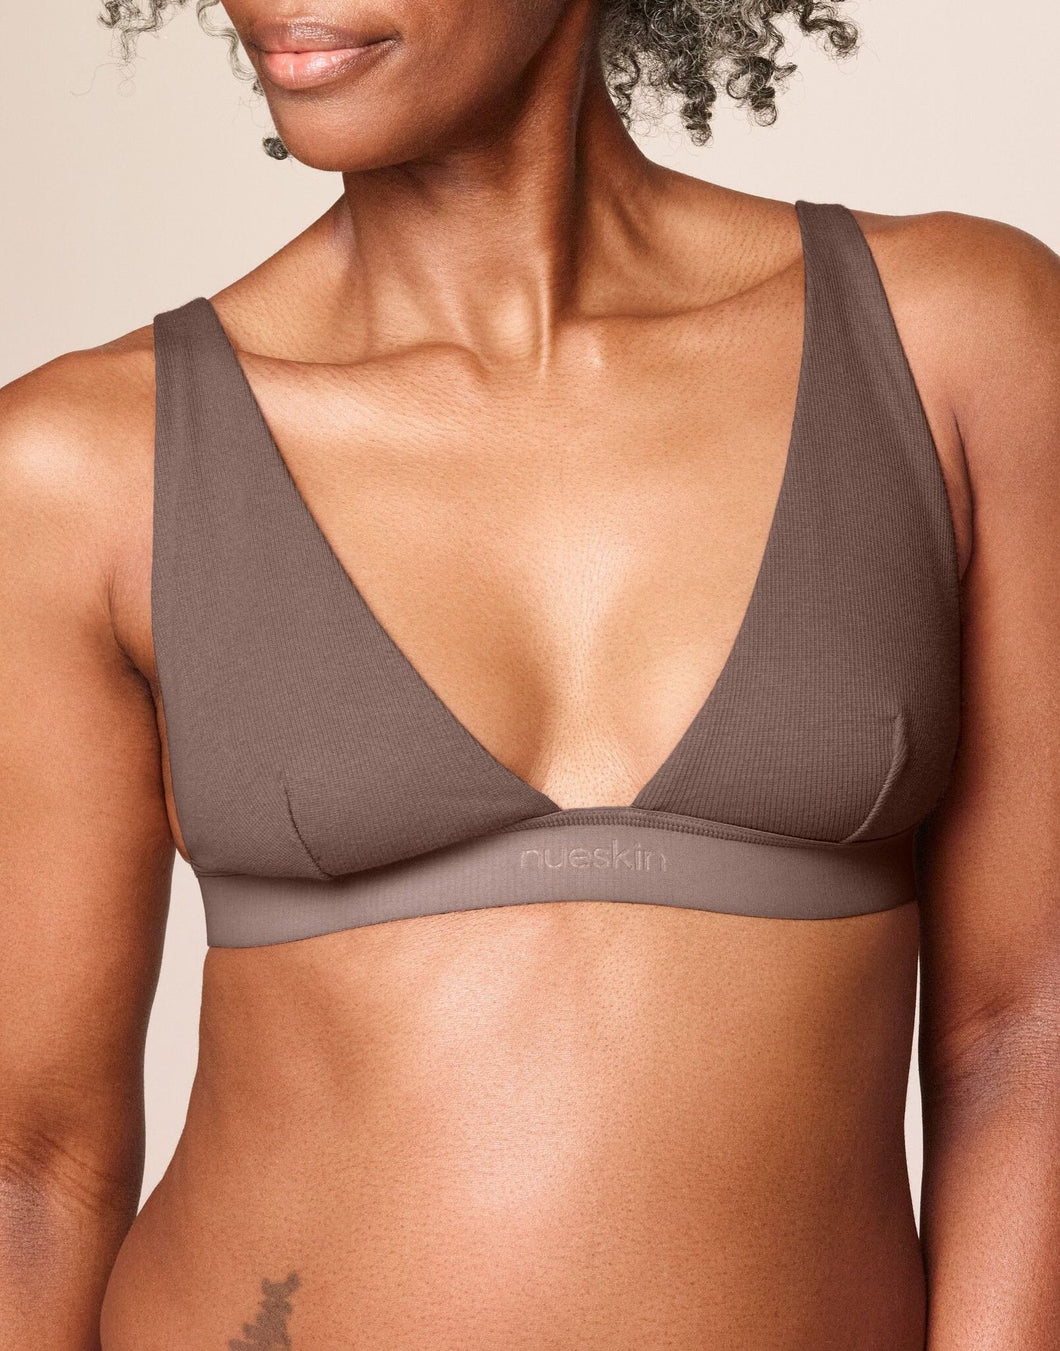 nueskin Tania in color Deep Taupe and shape triangle